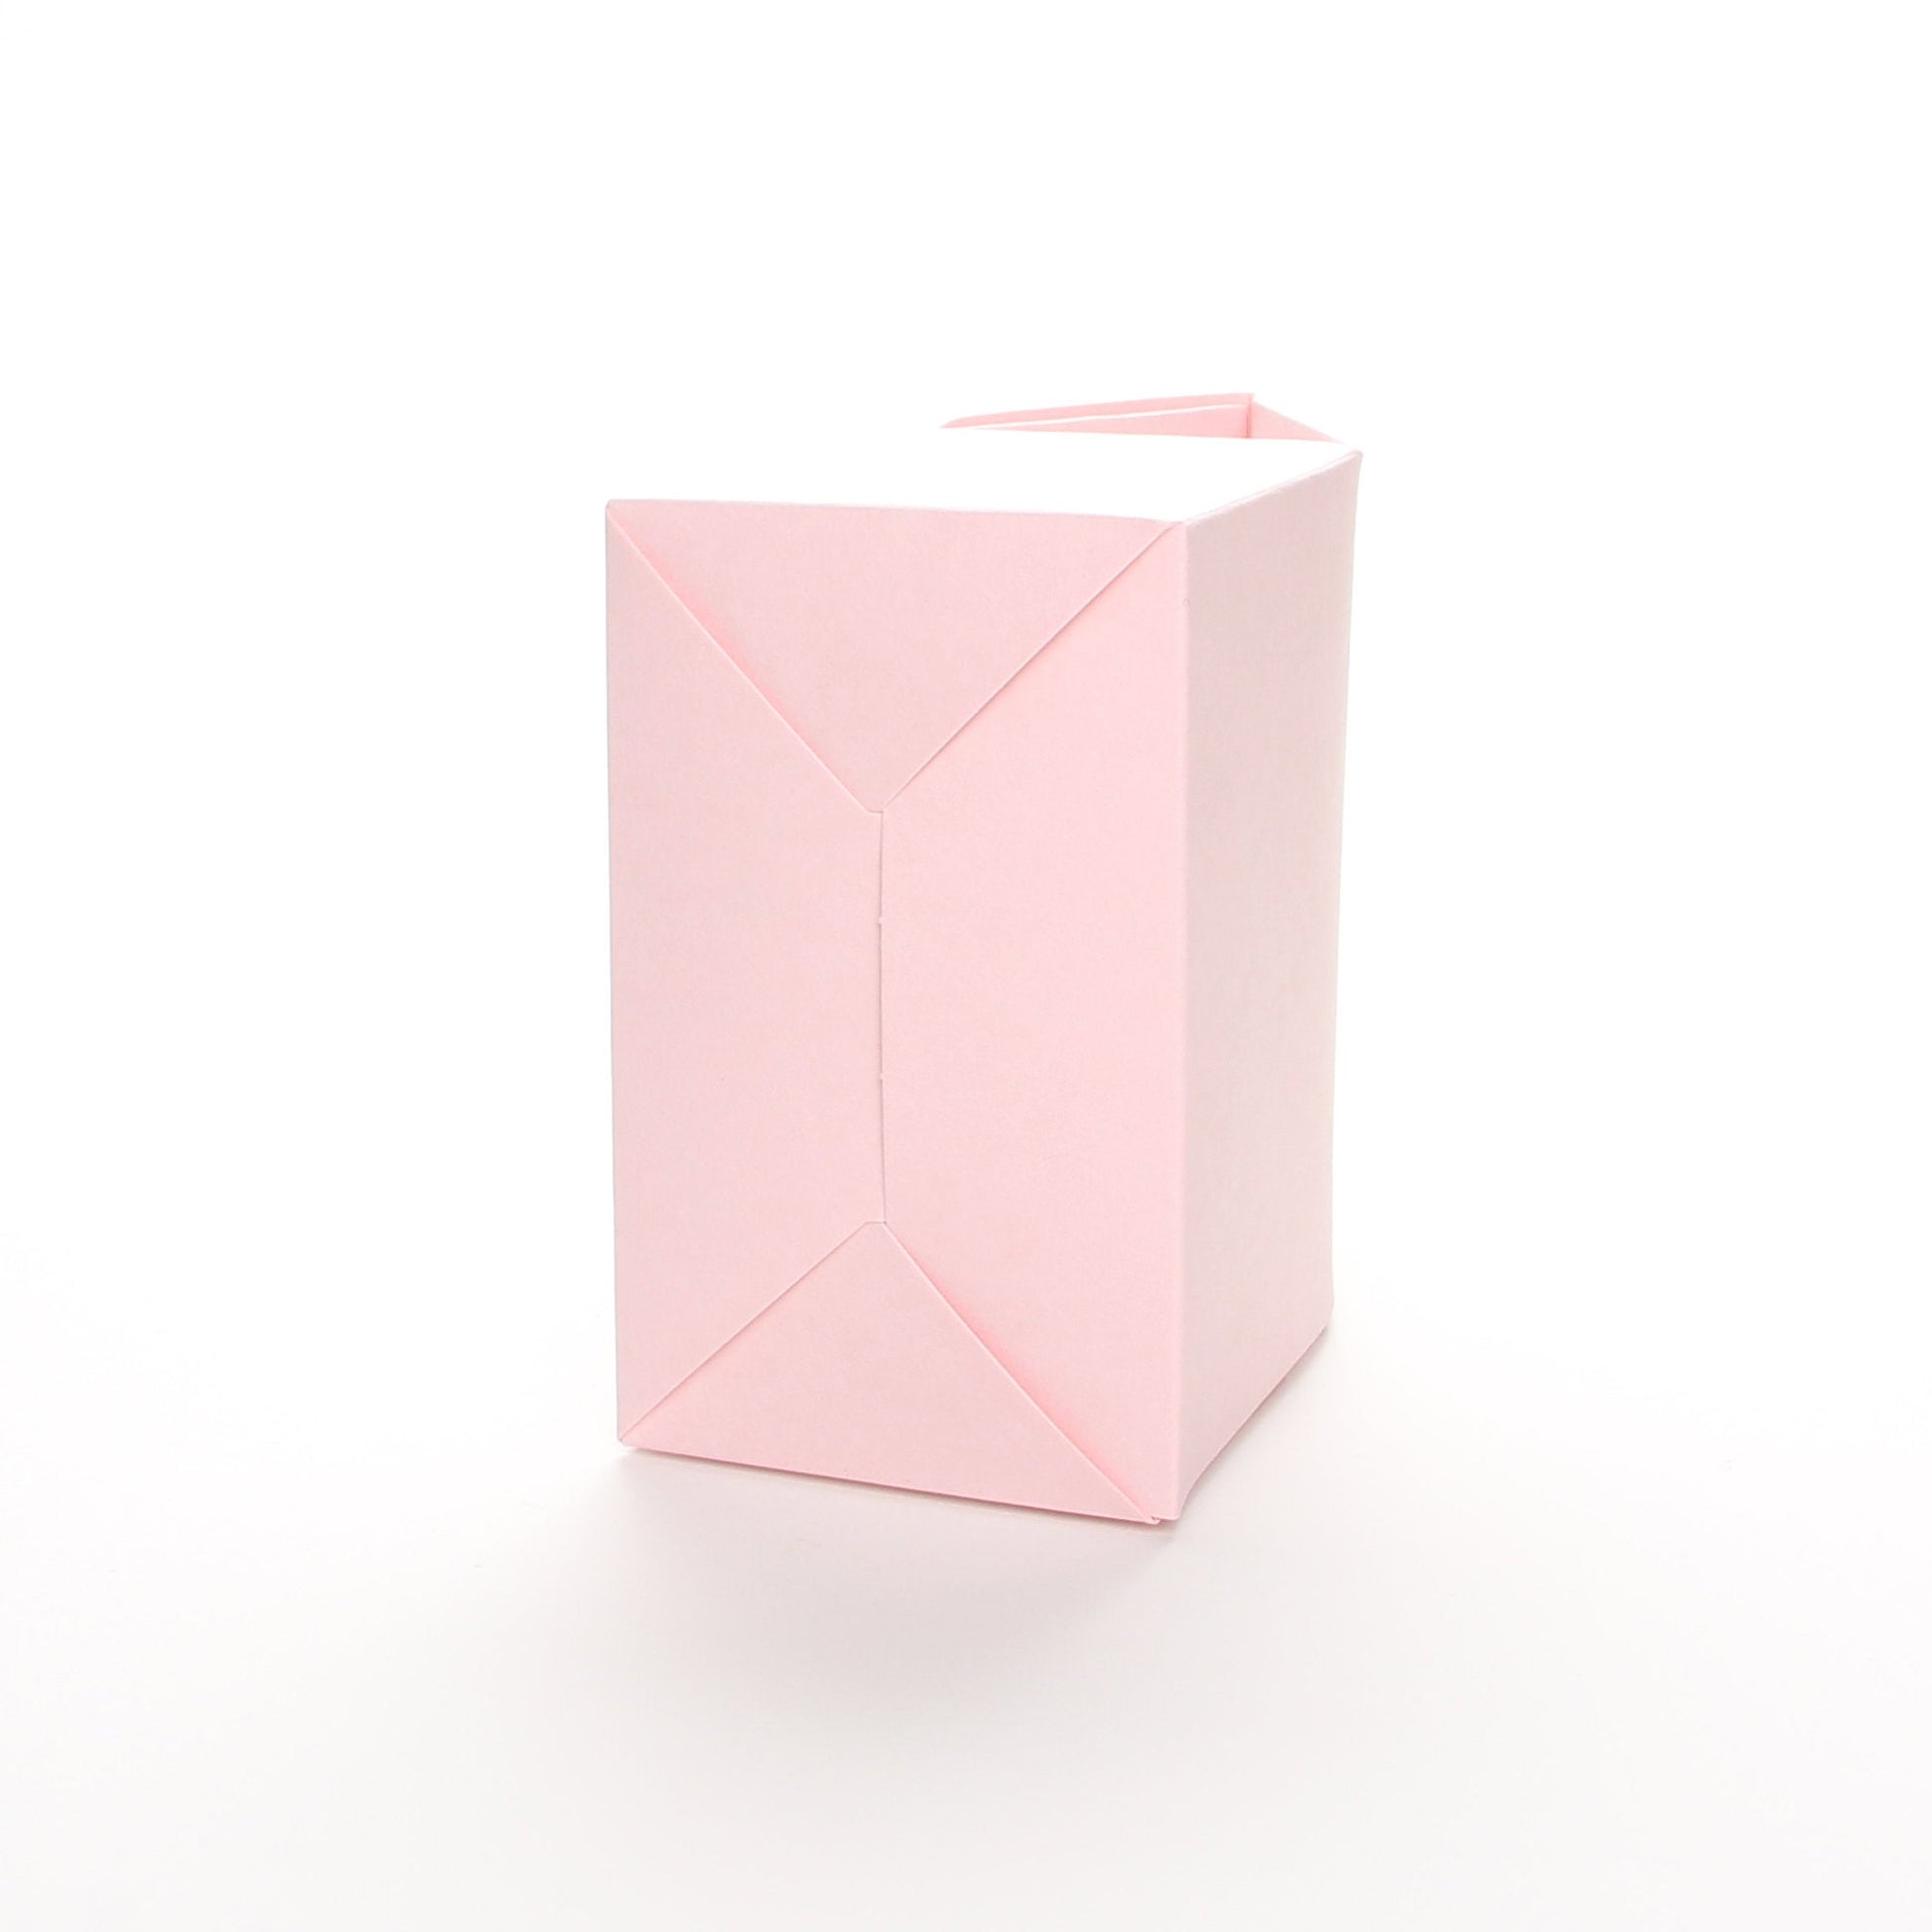 Bottom view of Lux Party’s pink favor box on a white background.